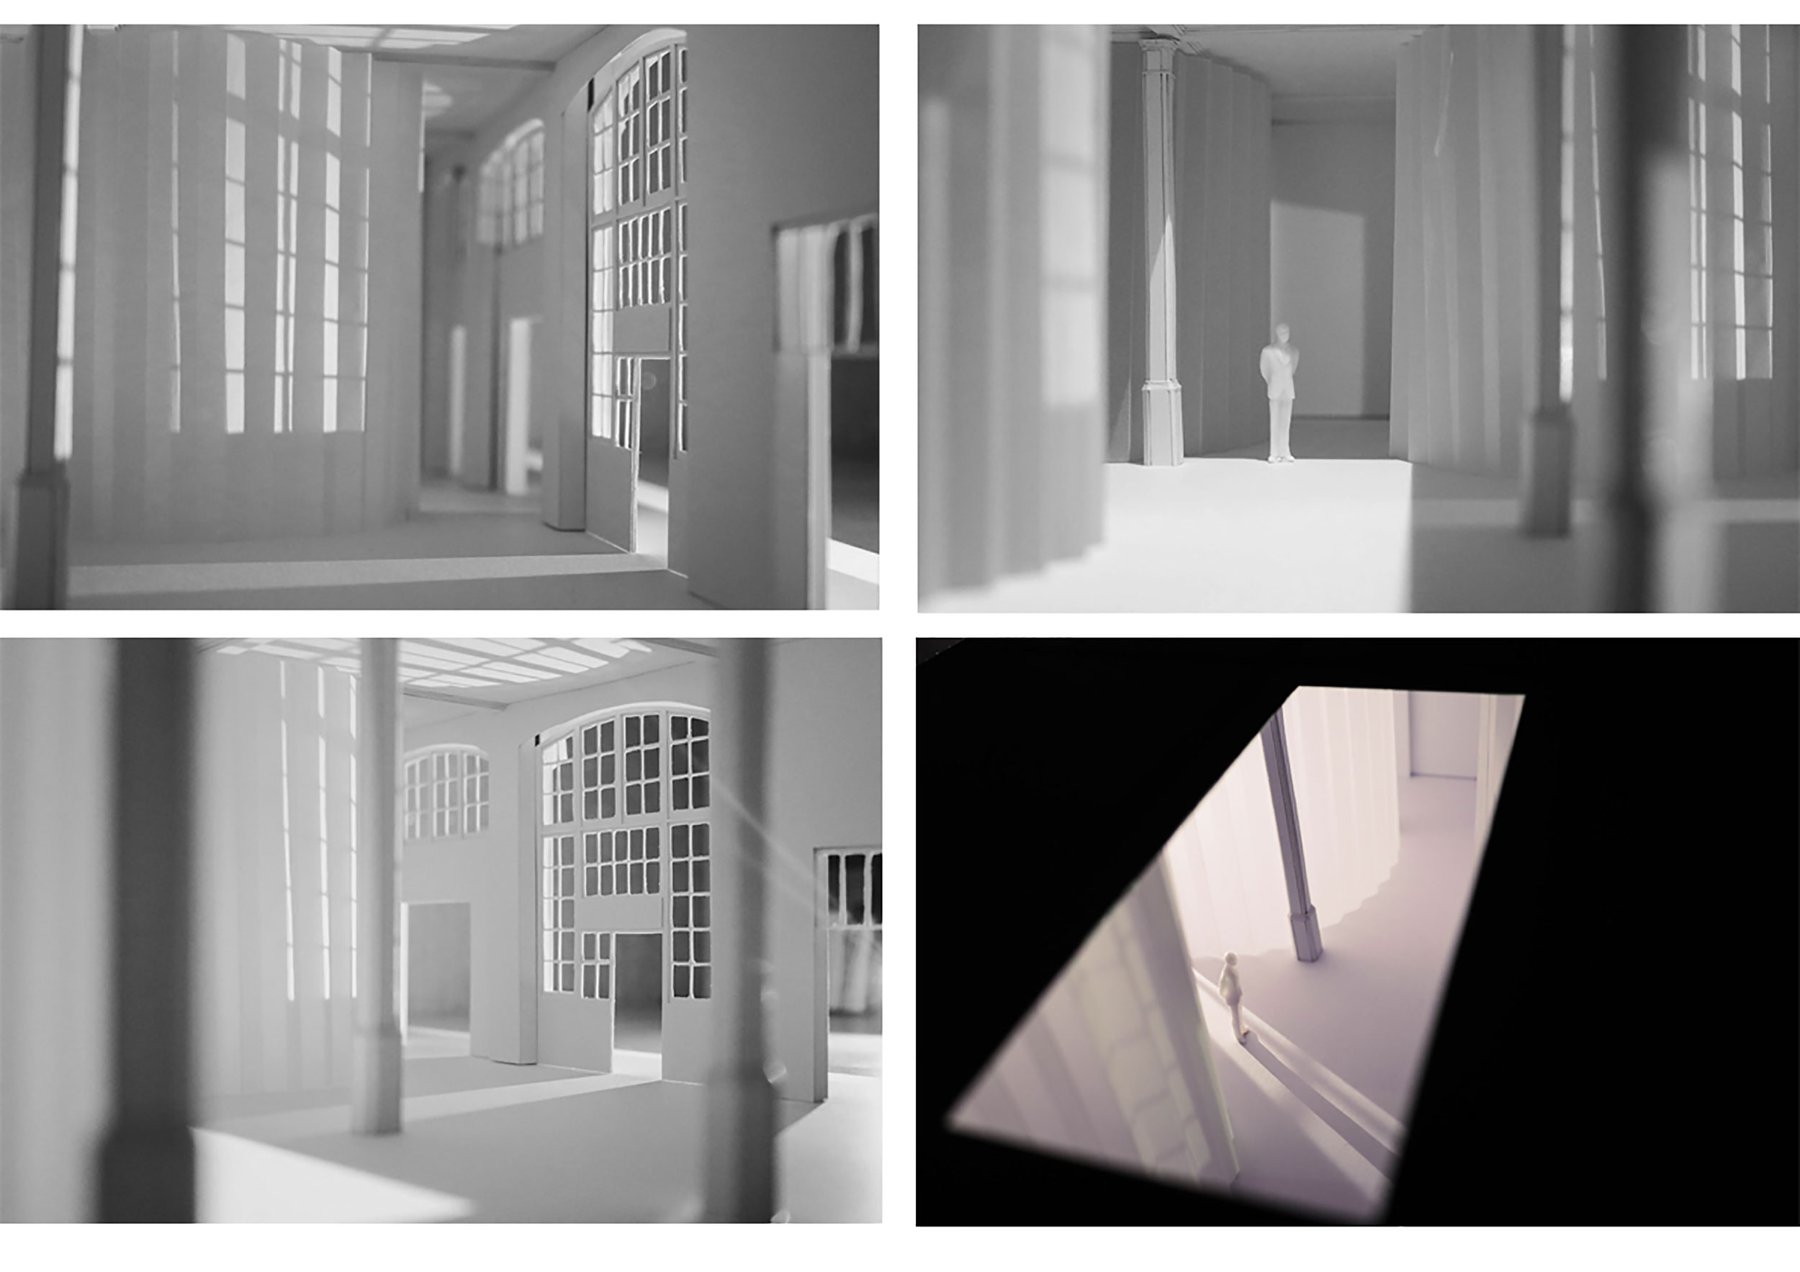 A series of images show a model of an interior from different angles